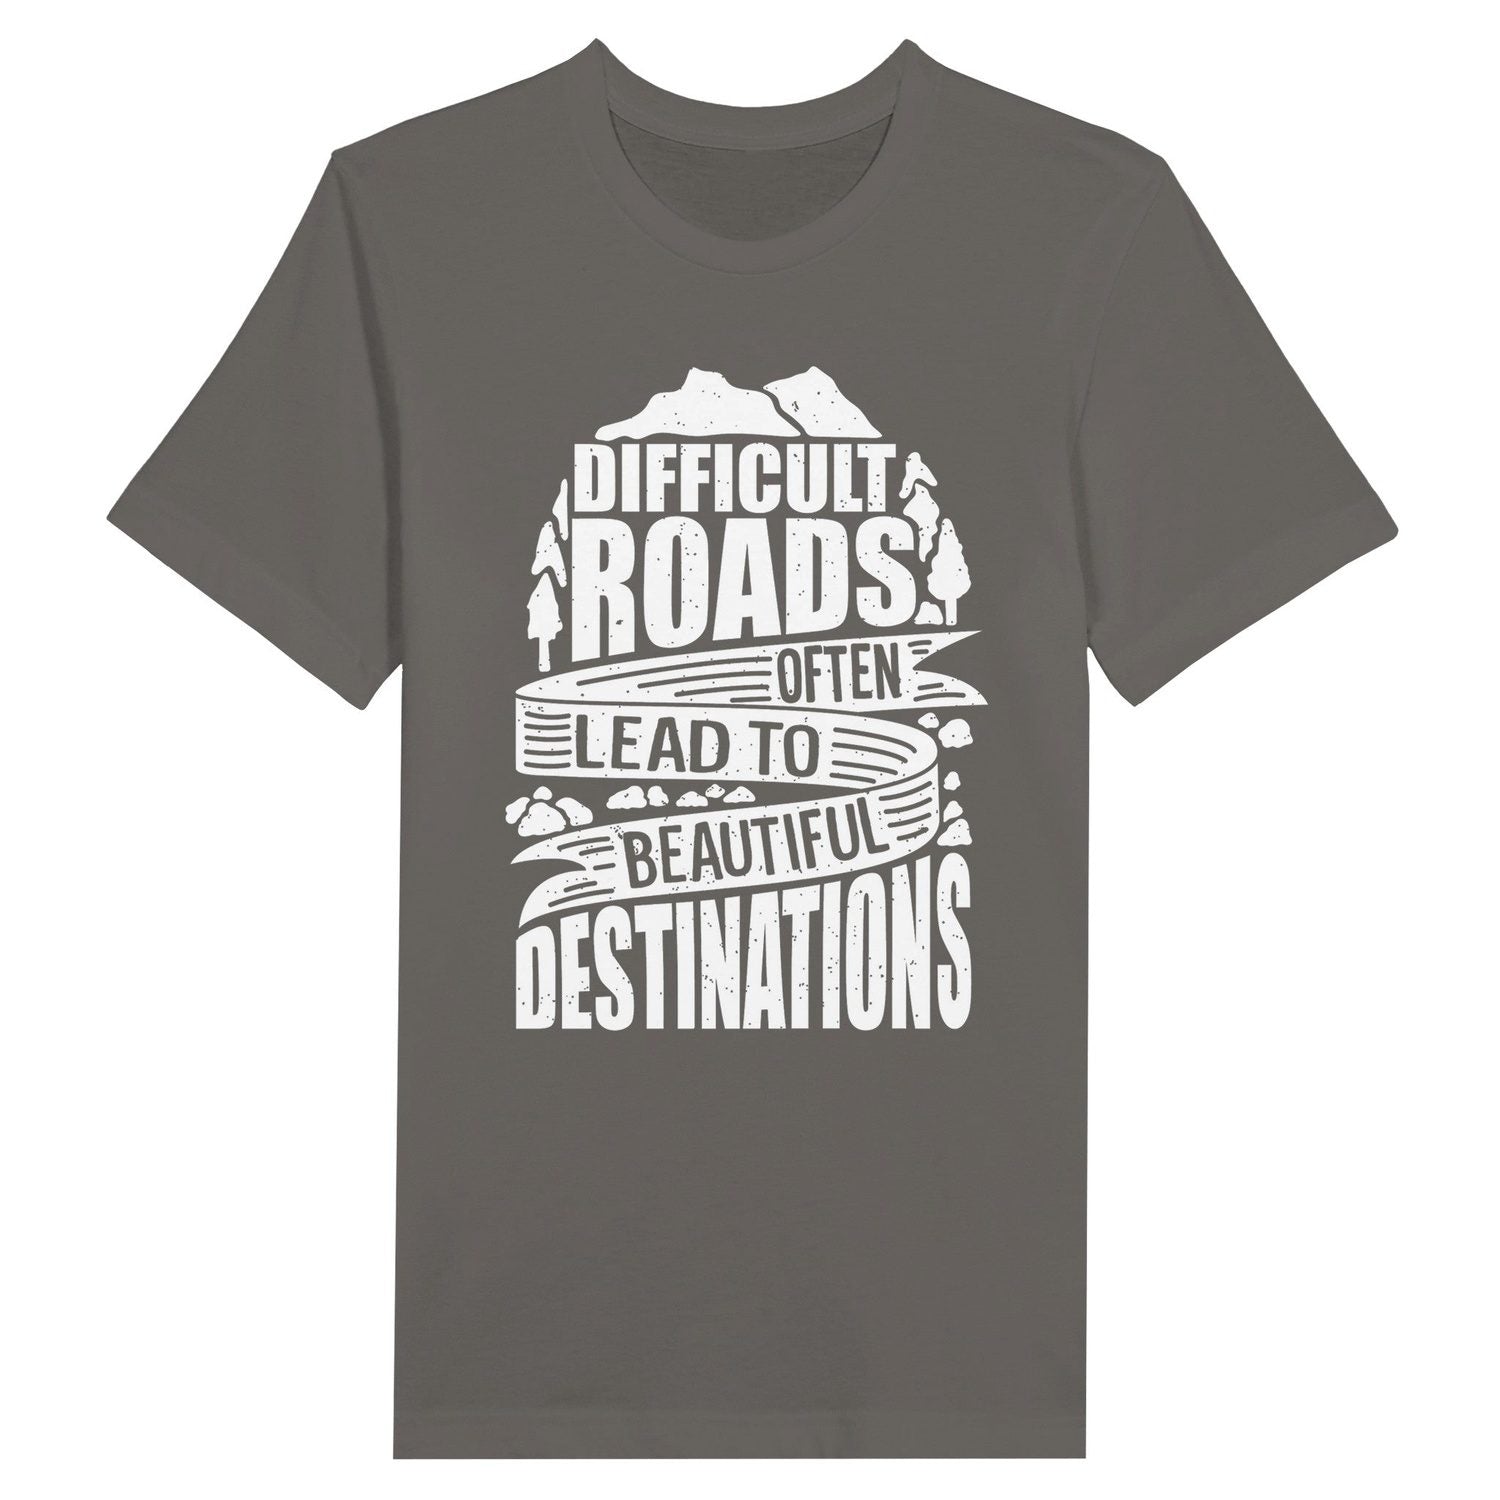 An image of Difficult Roads Often Lead To Beautiful Destinations | Premium Unisex Inspirational T-shirt available at 3rd Day Christian Clothing UK